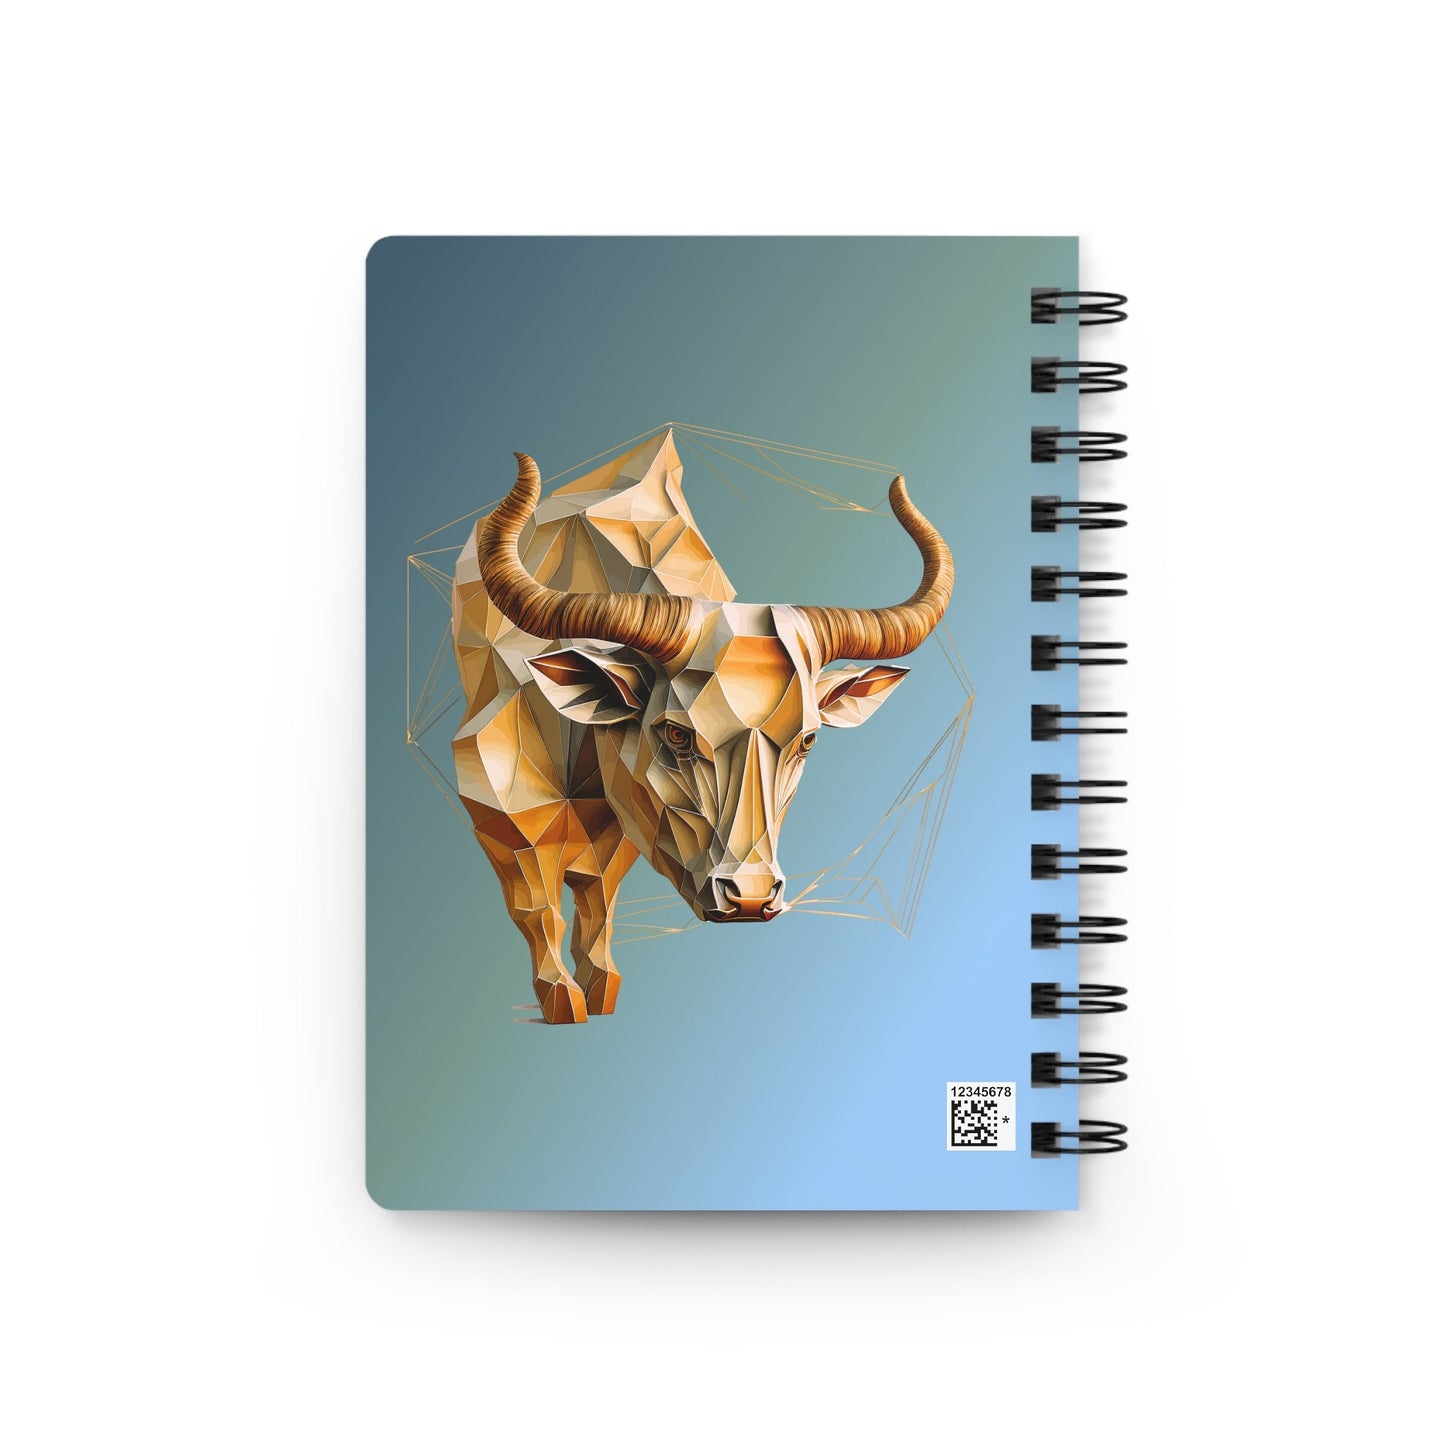 CrazyYetiClothing, CYC, Taurus (Spiral Bound Journal), Paper products